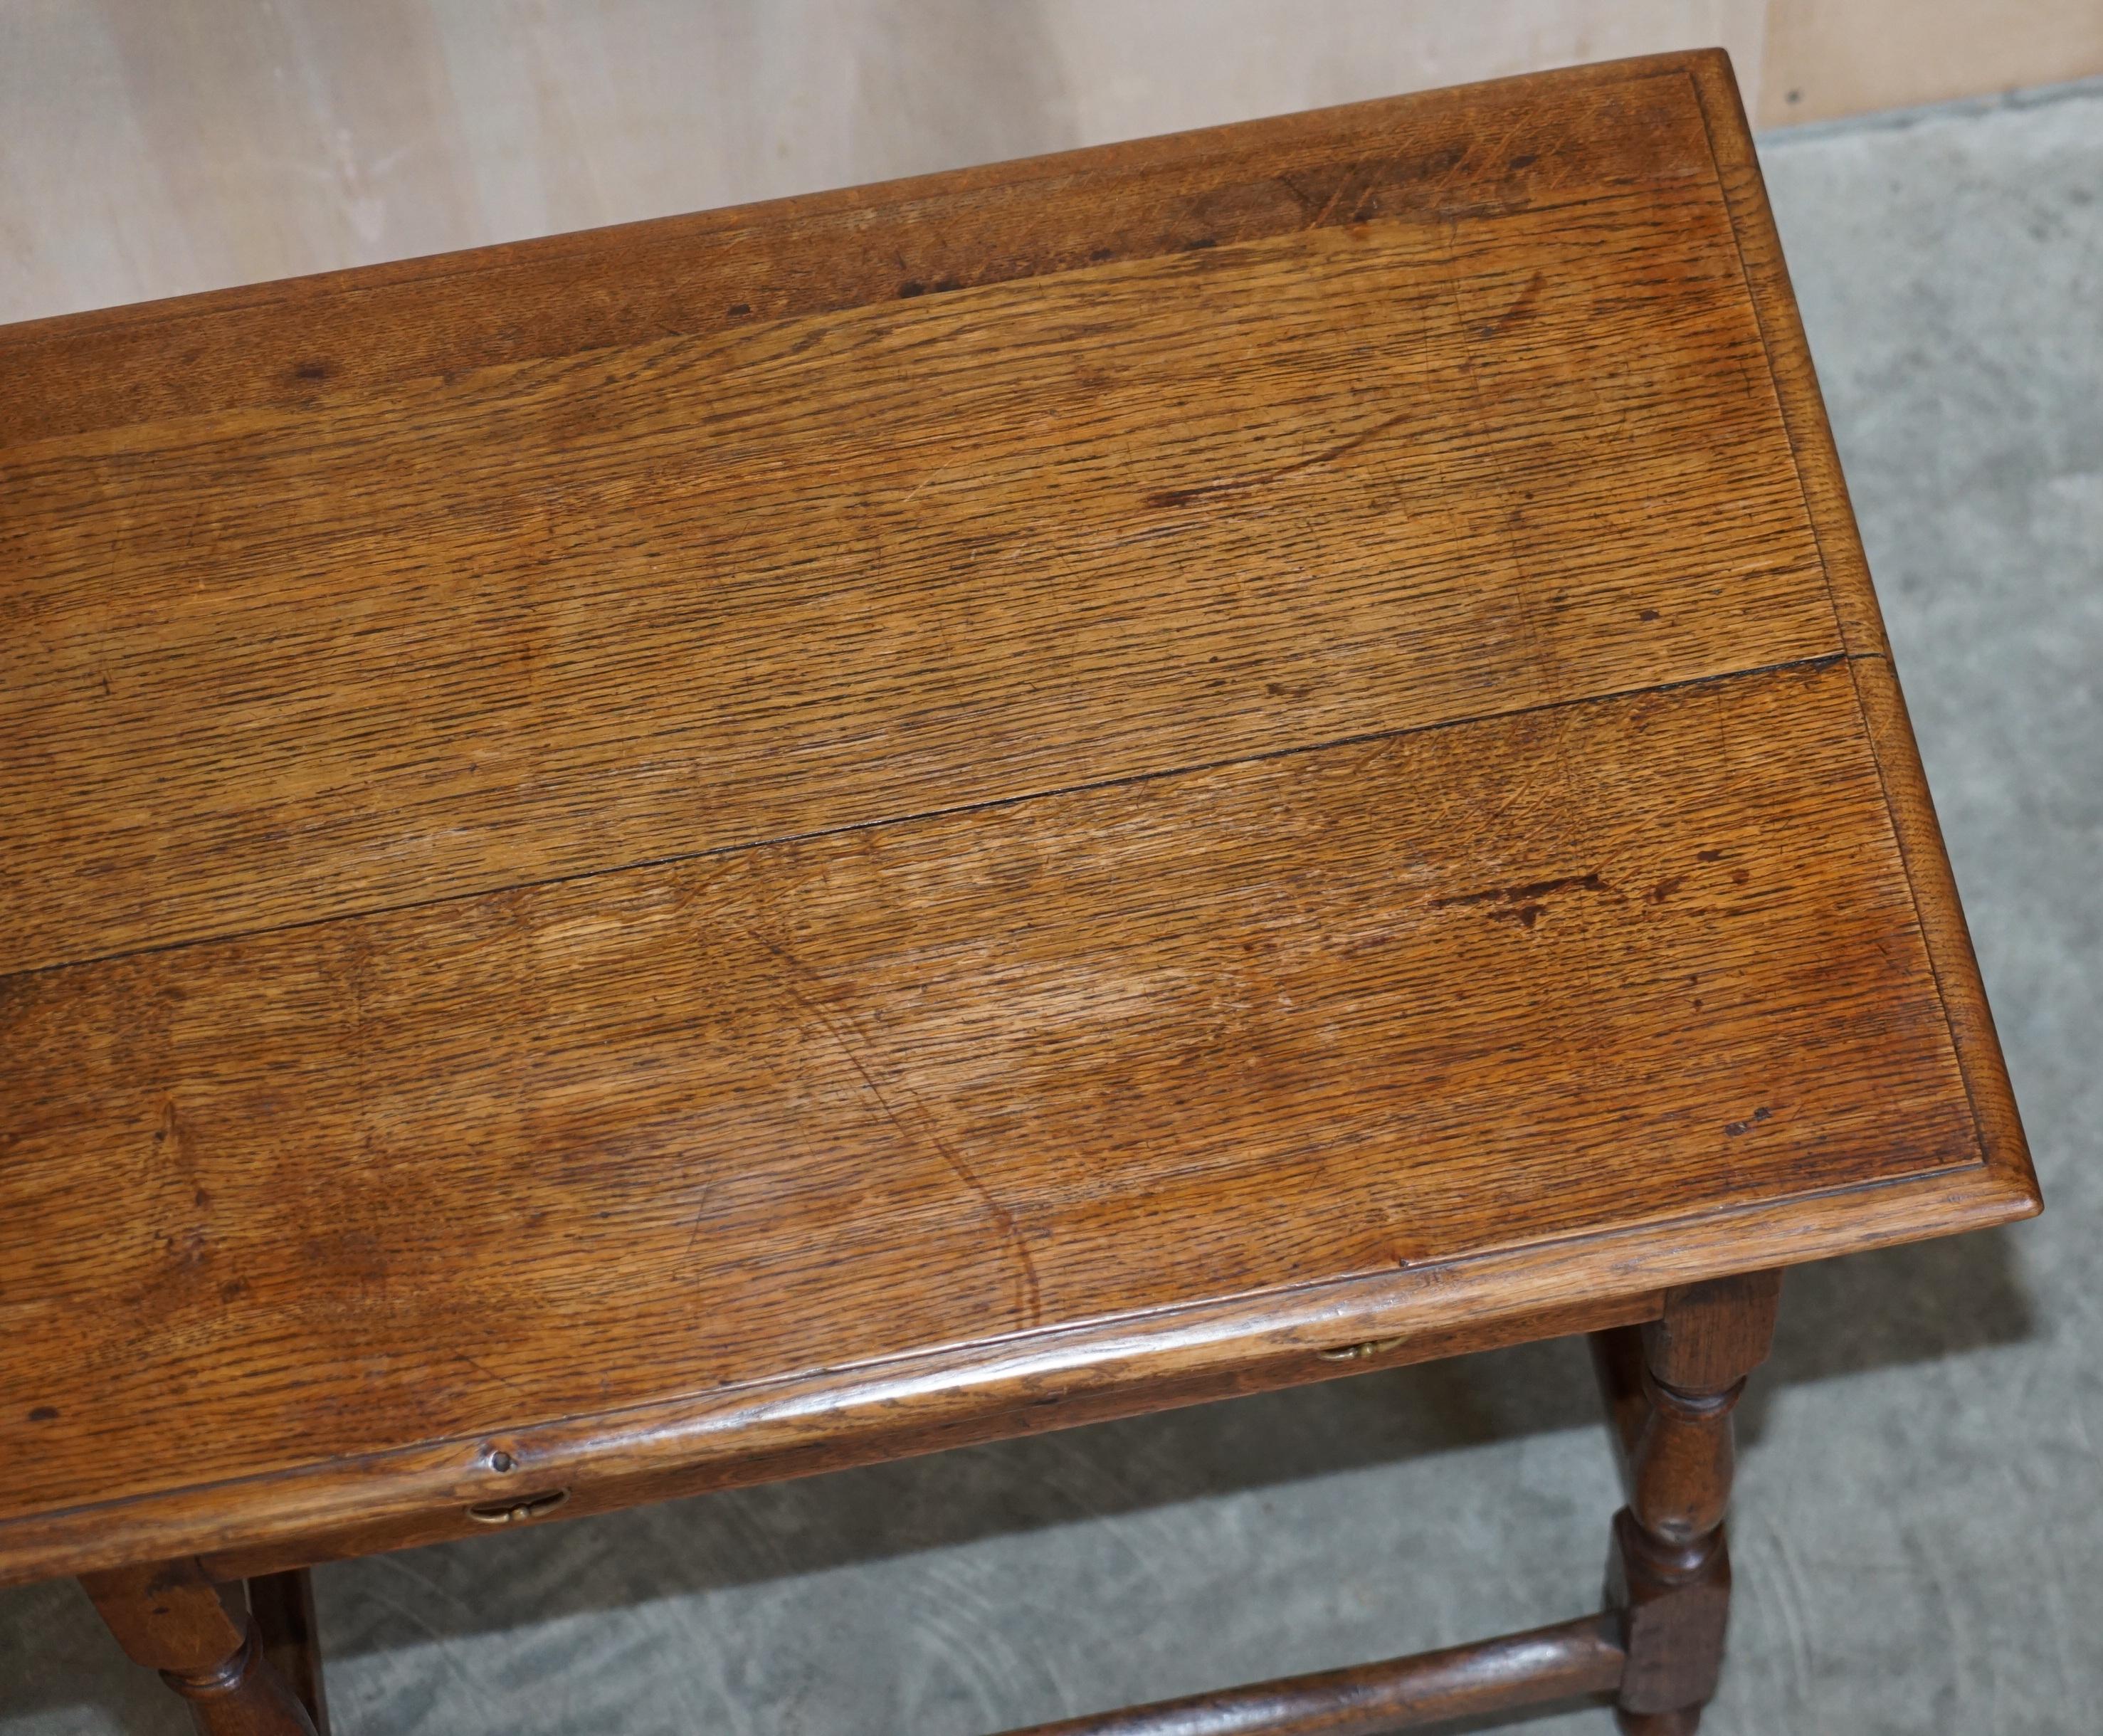 Antique circa 1700 English Oak Jointed Lowboy Side Table with Single Drawer For Sale 5